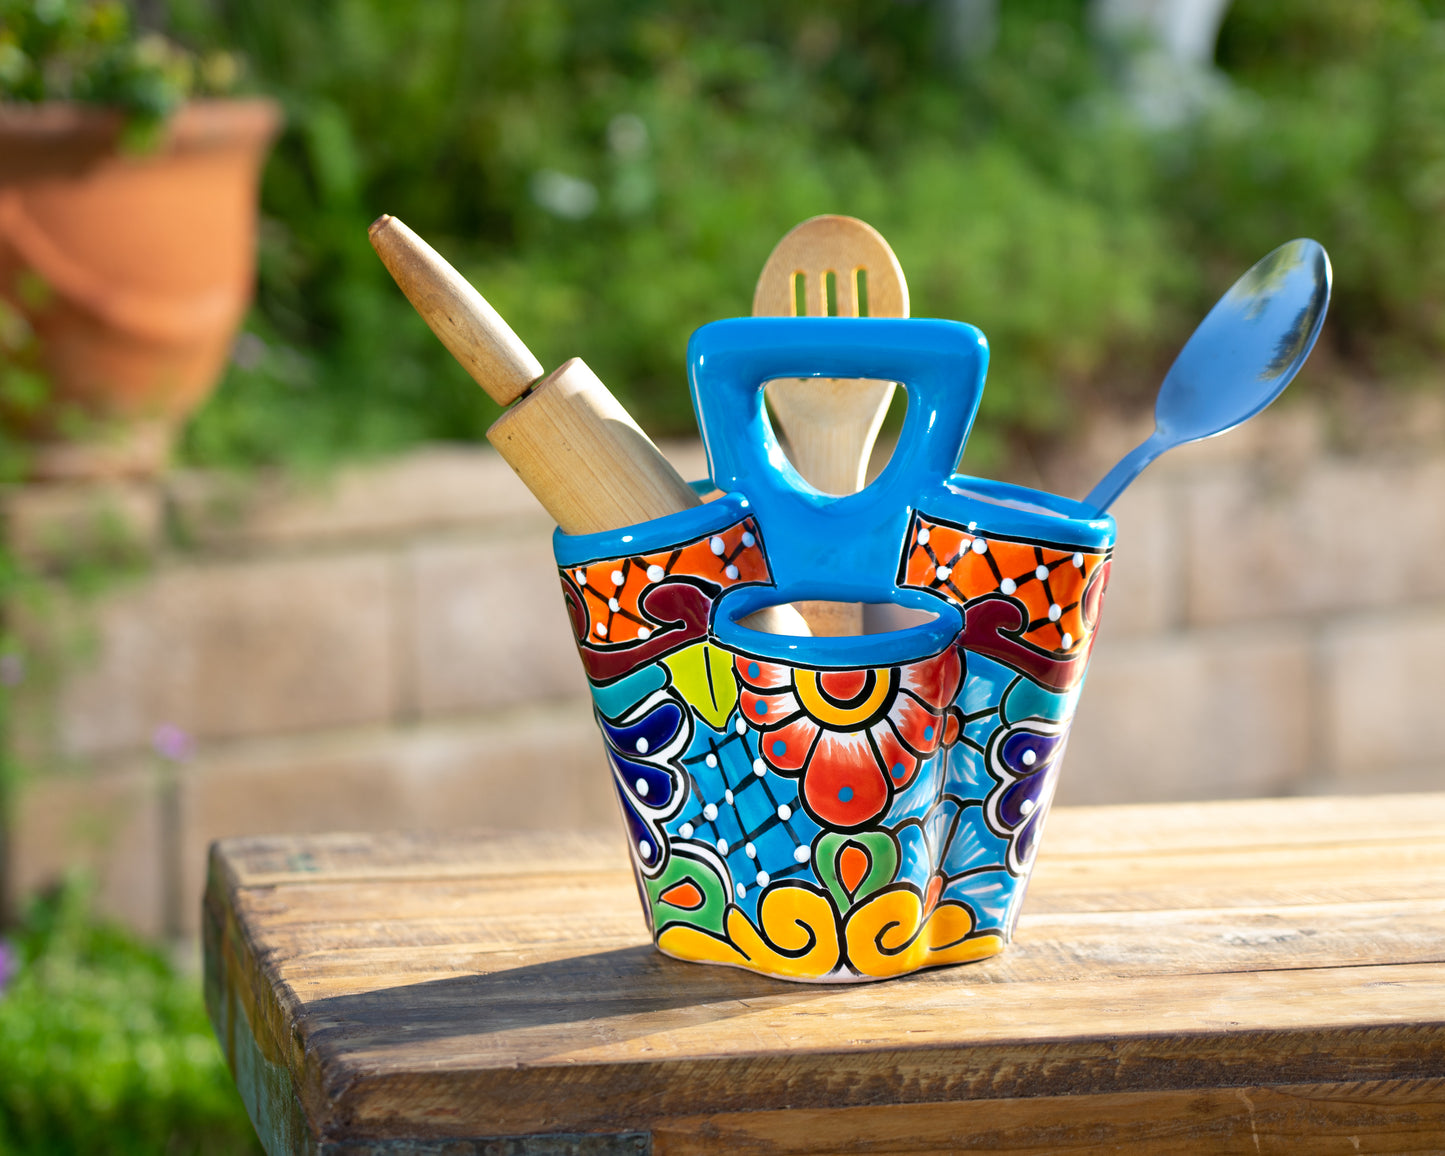 Utensil Caddy - Turquoise